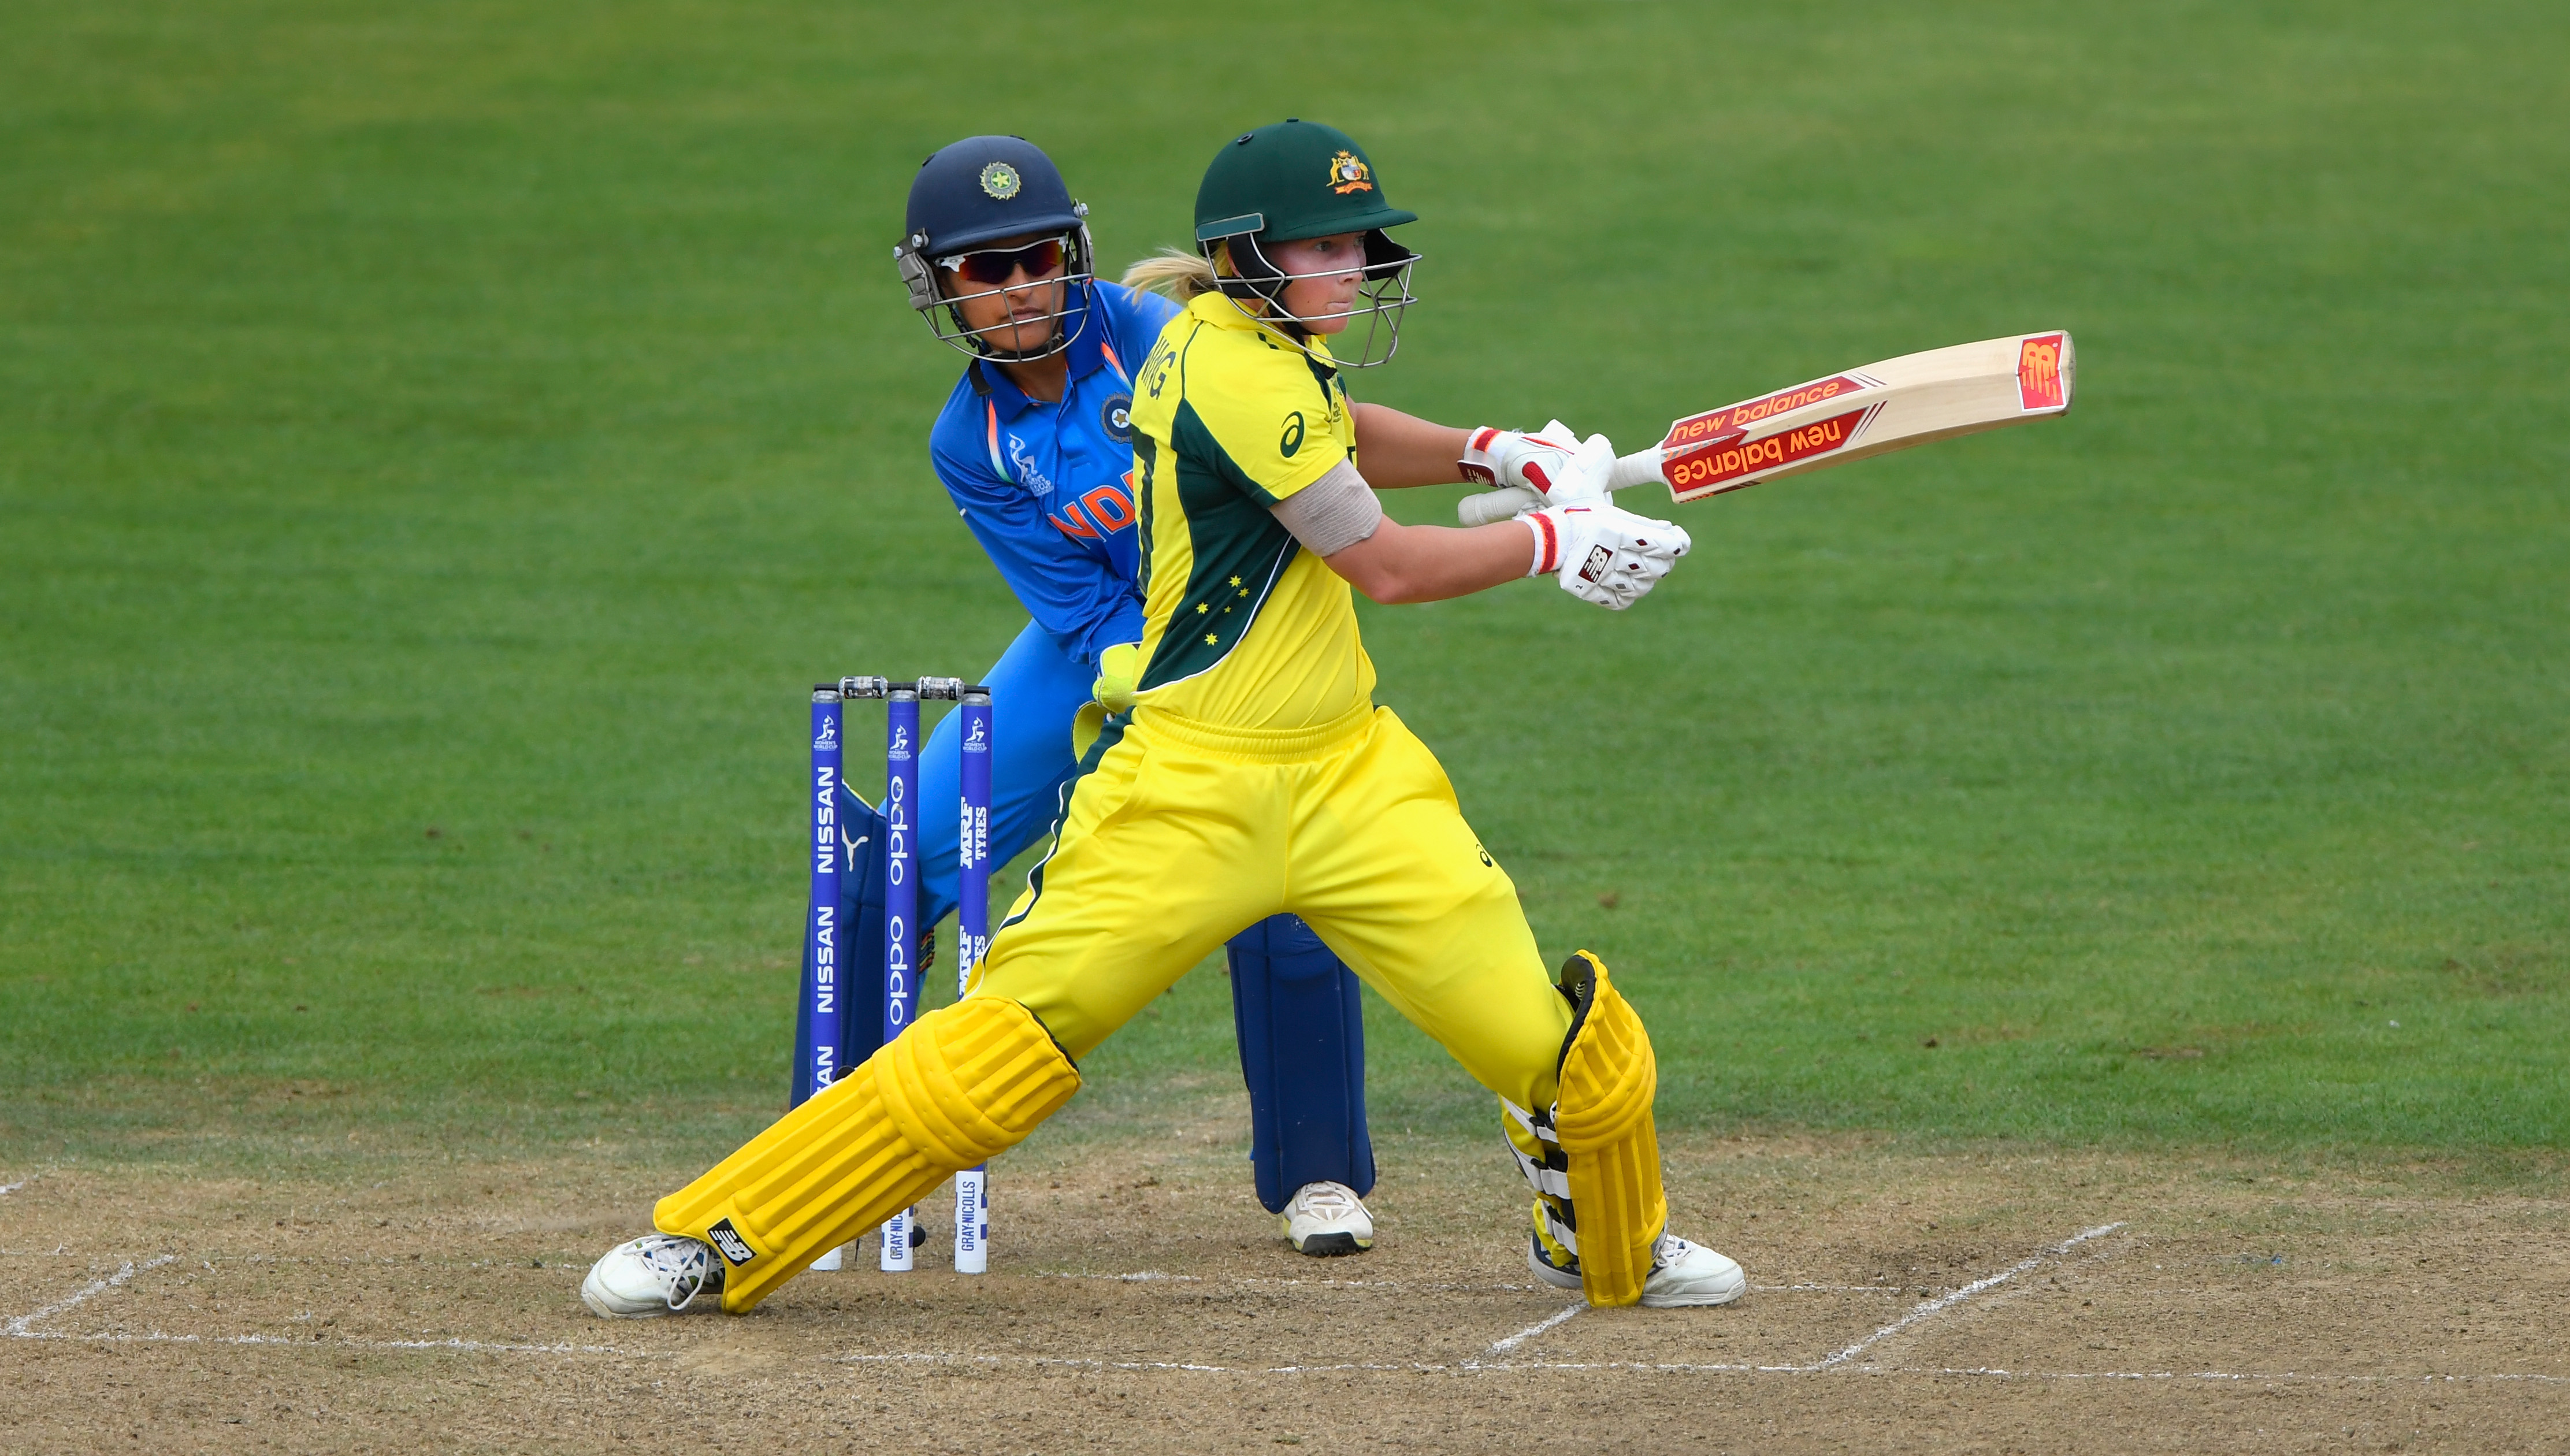 ICC Women’s World Cup 2017 | Clinical Australia hand India their second successive loss